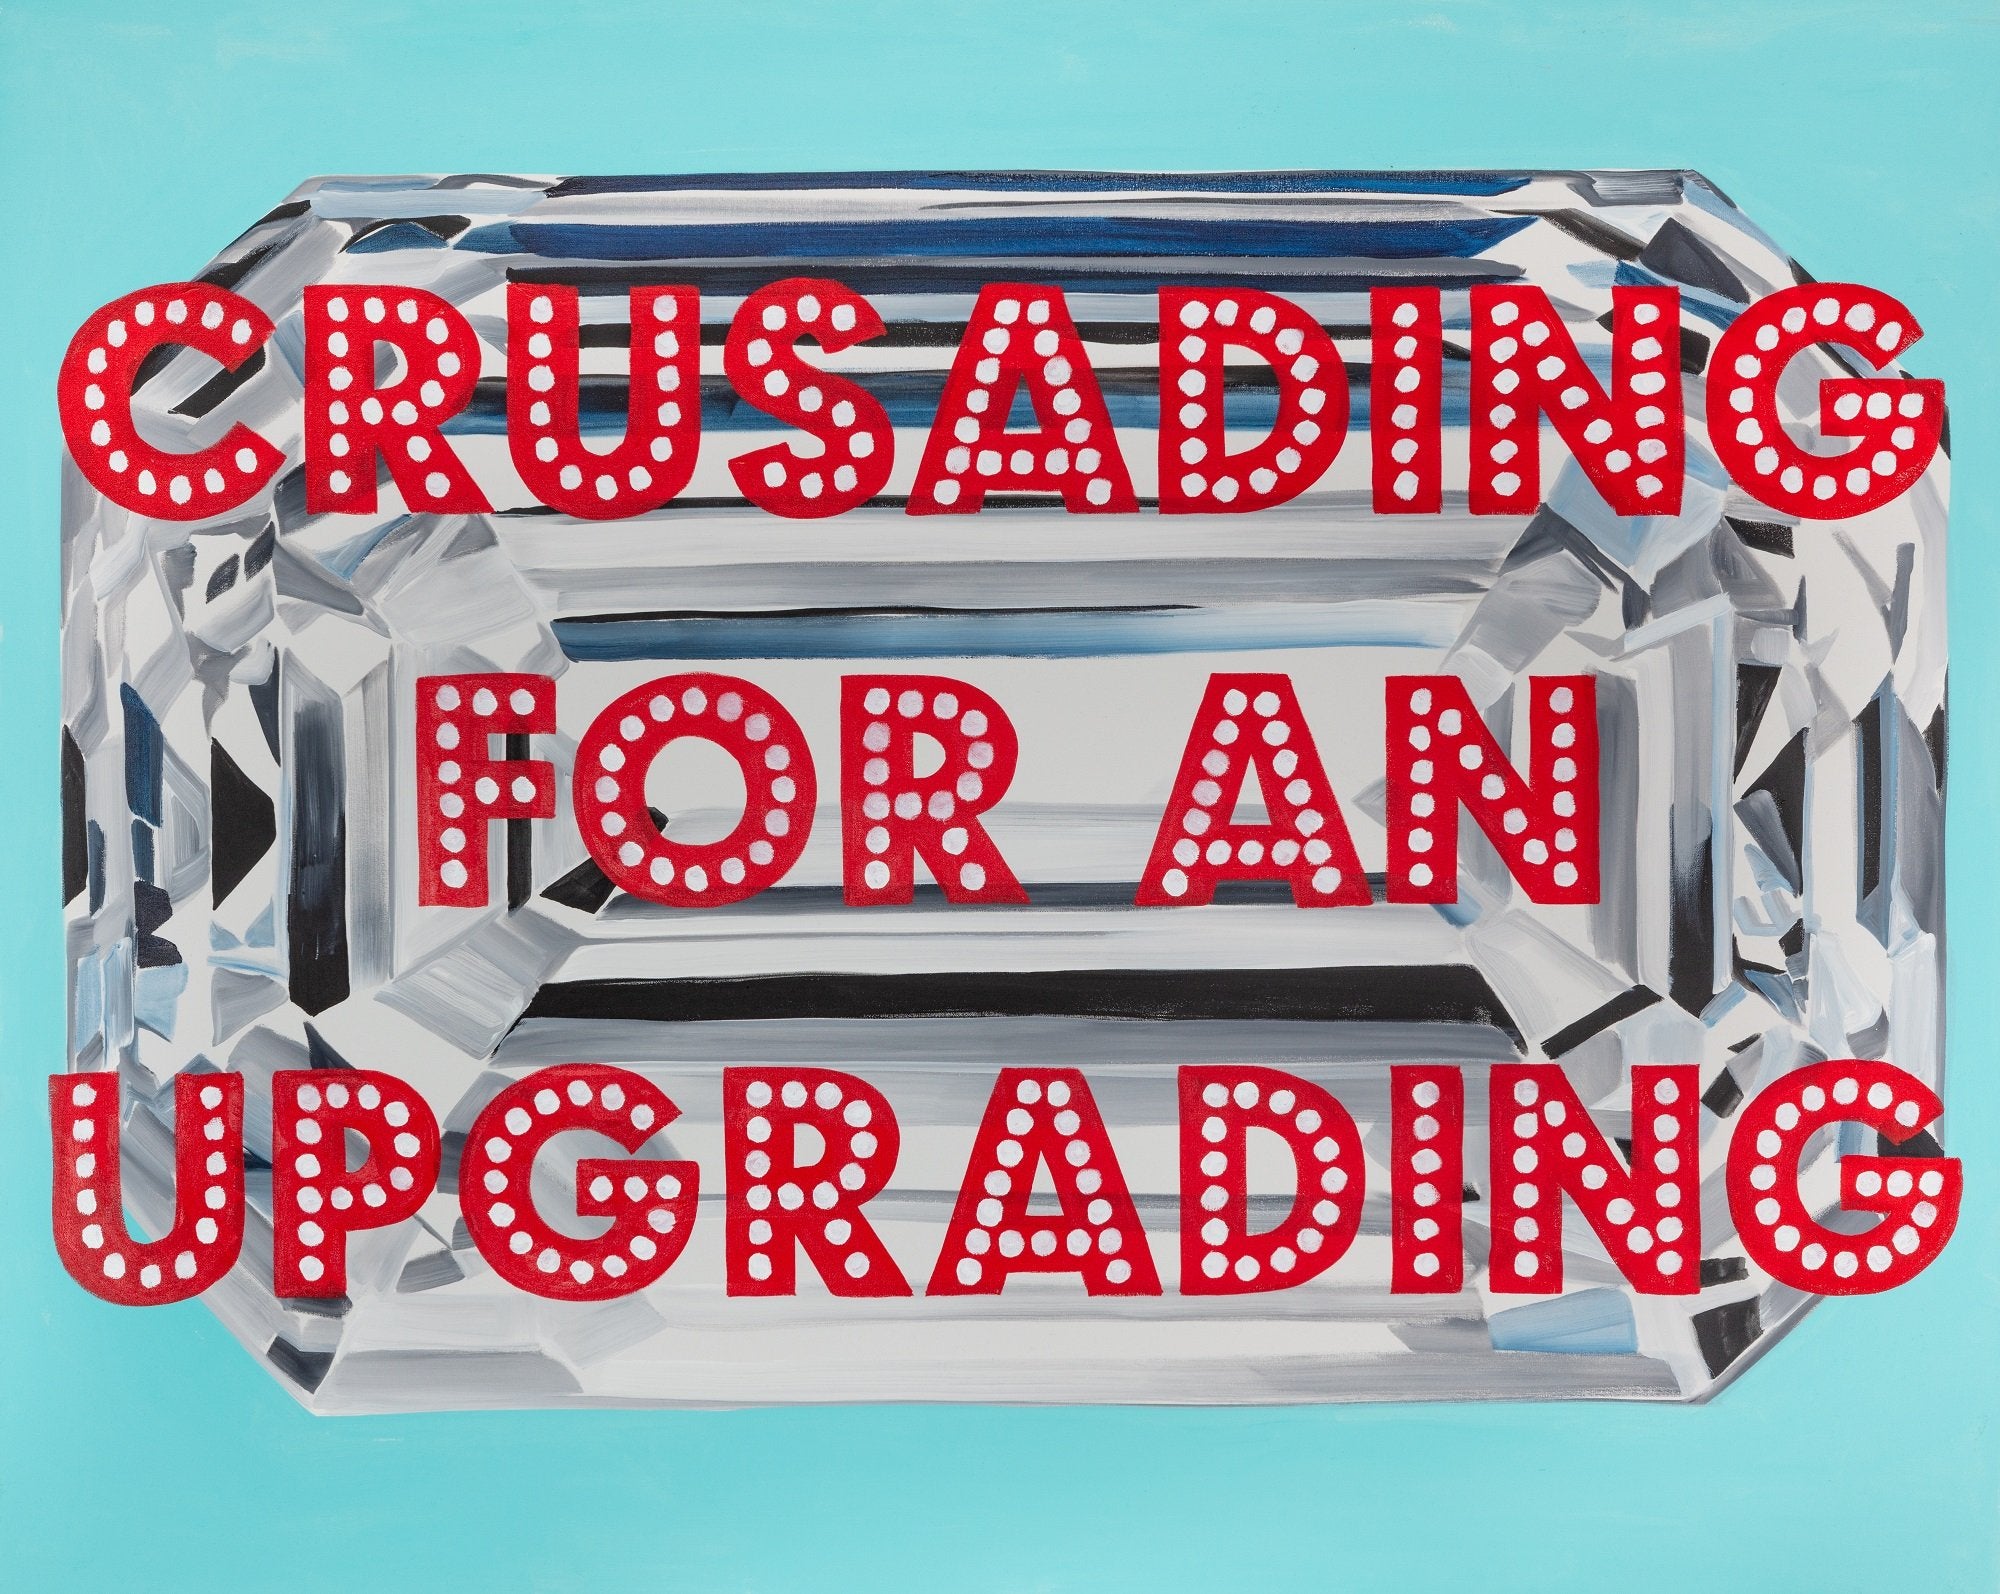 Crusading for an Upgrading